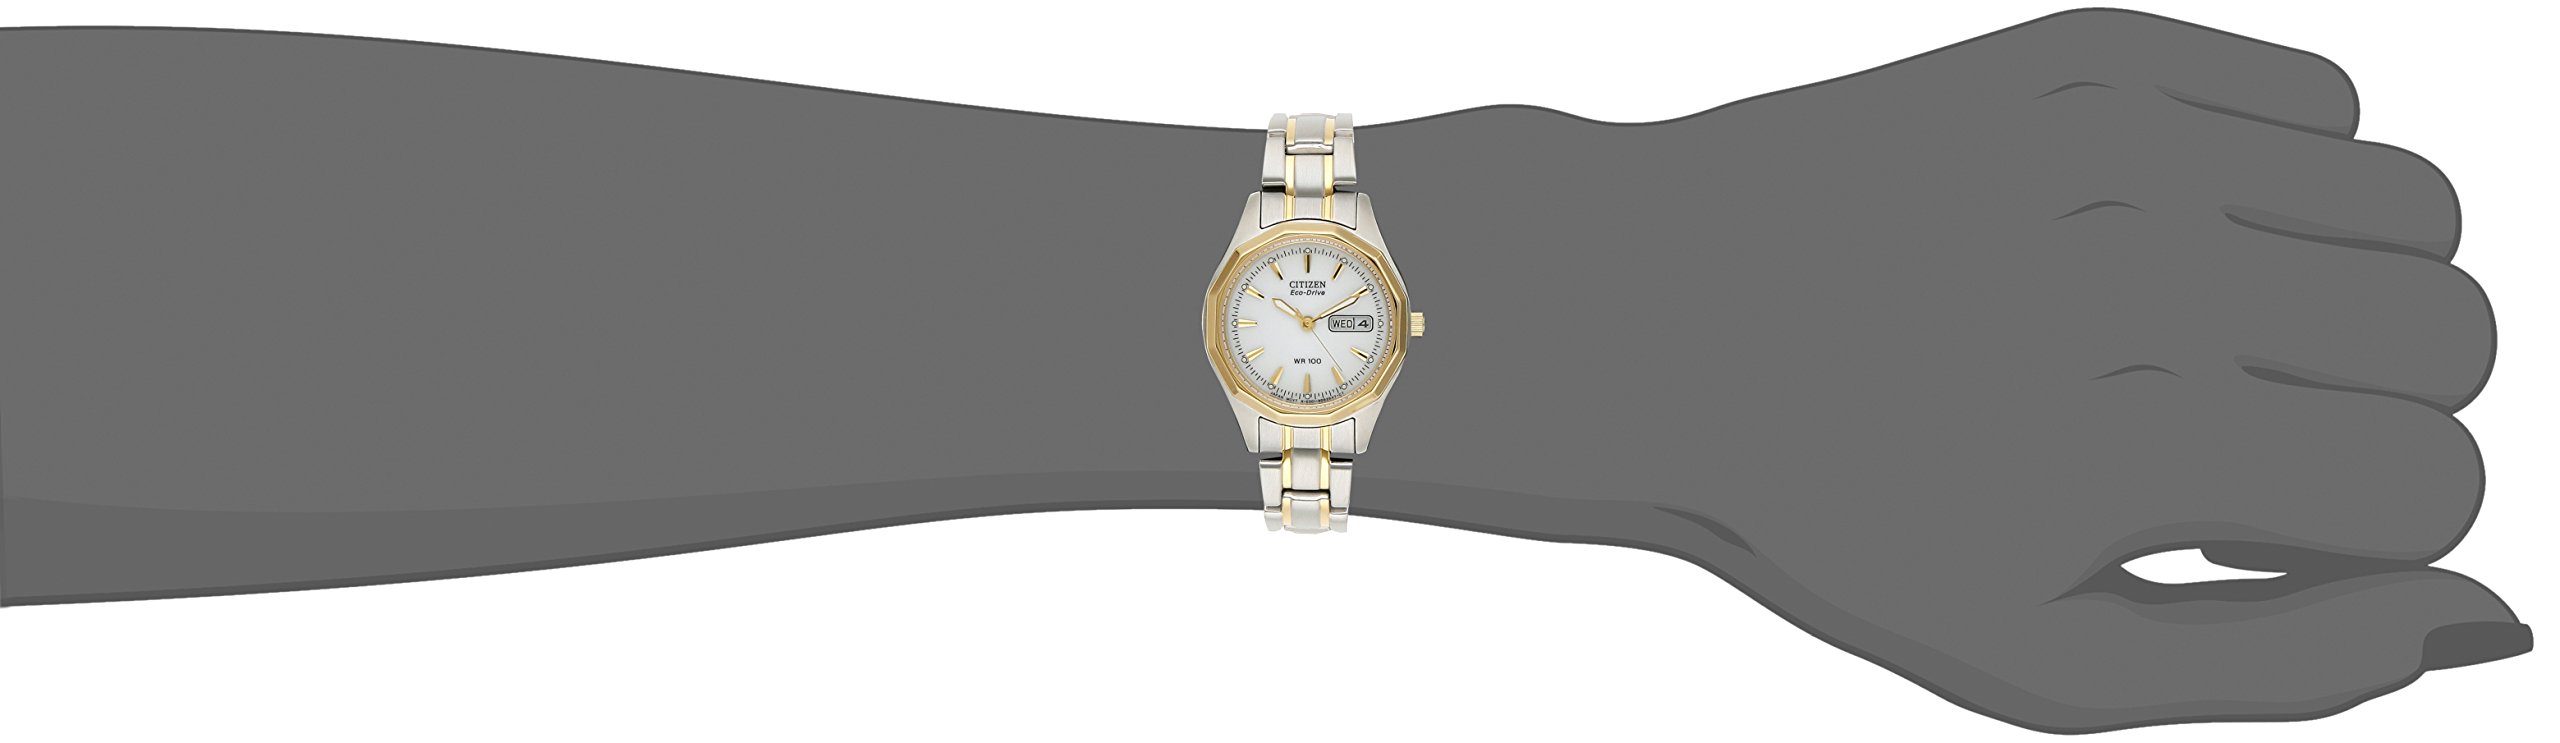 Citizen Women's Eco-Drive Dress Classic Watch in Two-tone Stainless Steel, White Dial (Model: EW3144-51A)